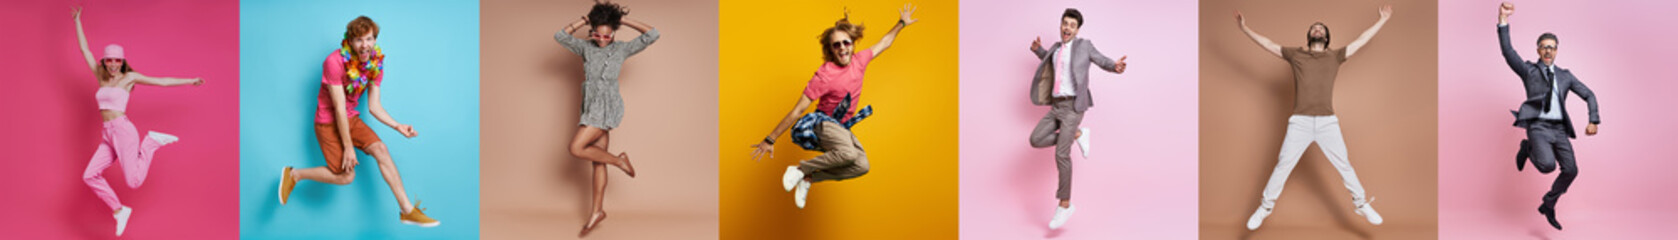 Collage of excited young people jumping against colorful backgrounds - 585519649